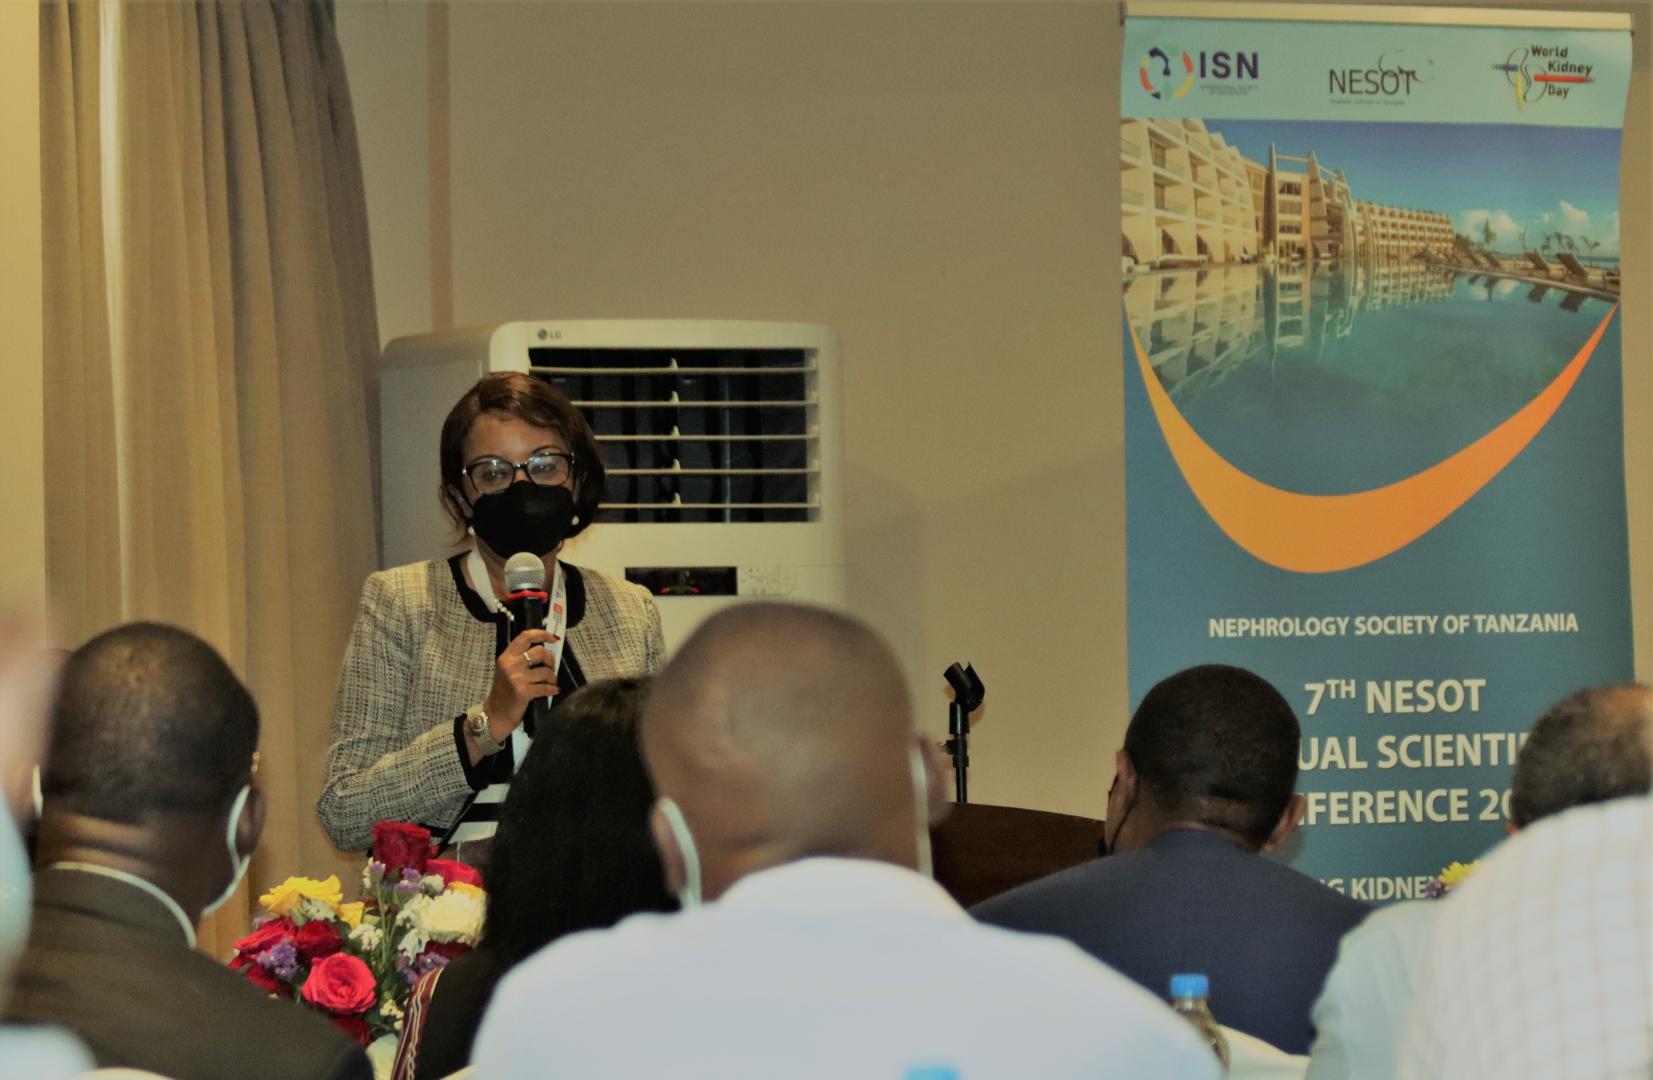 Dr. Tigest delivering remarks during the NESOT 7th Annual Scientific Conference